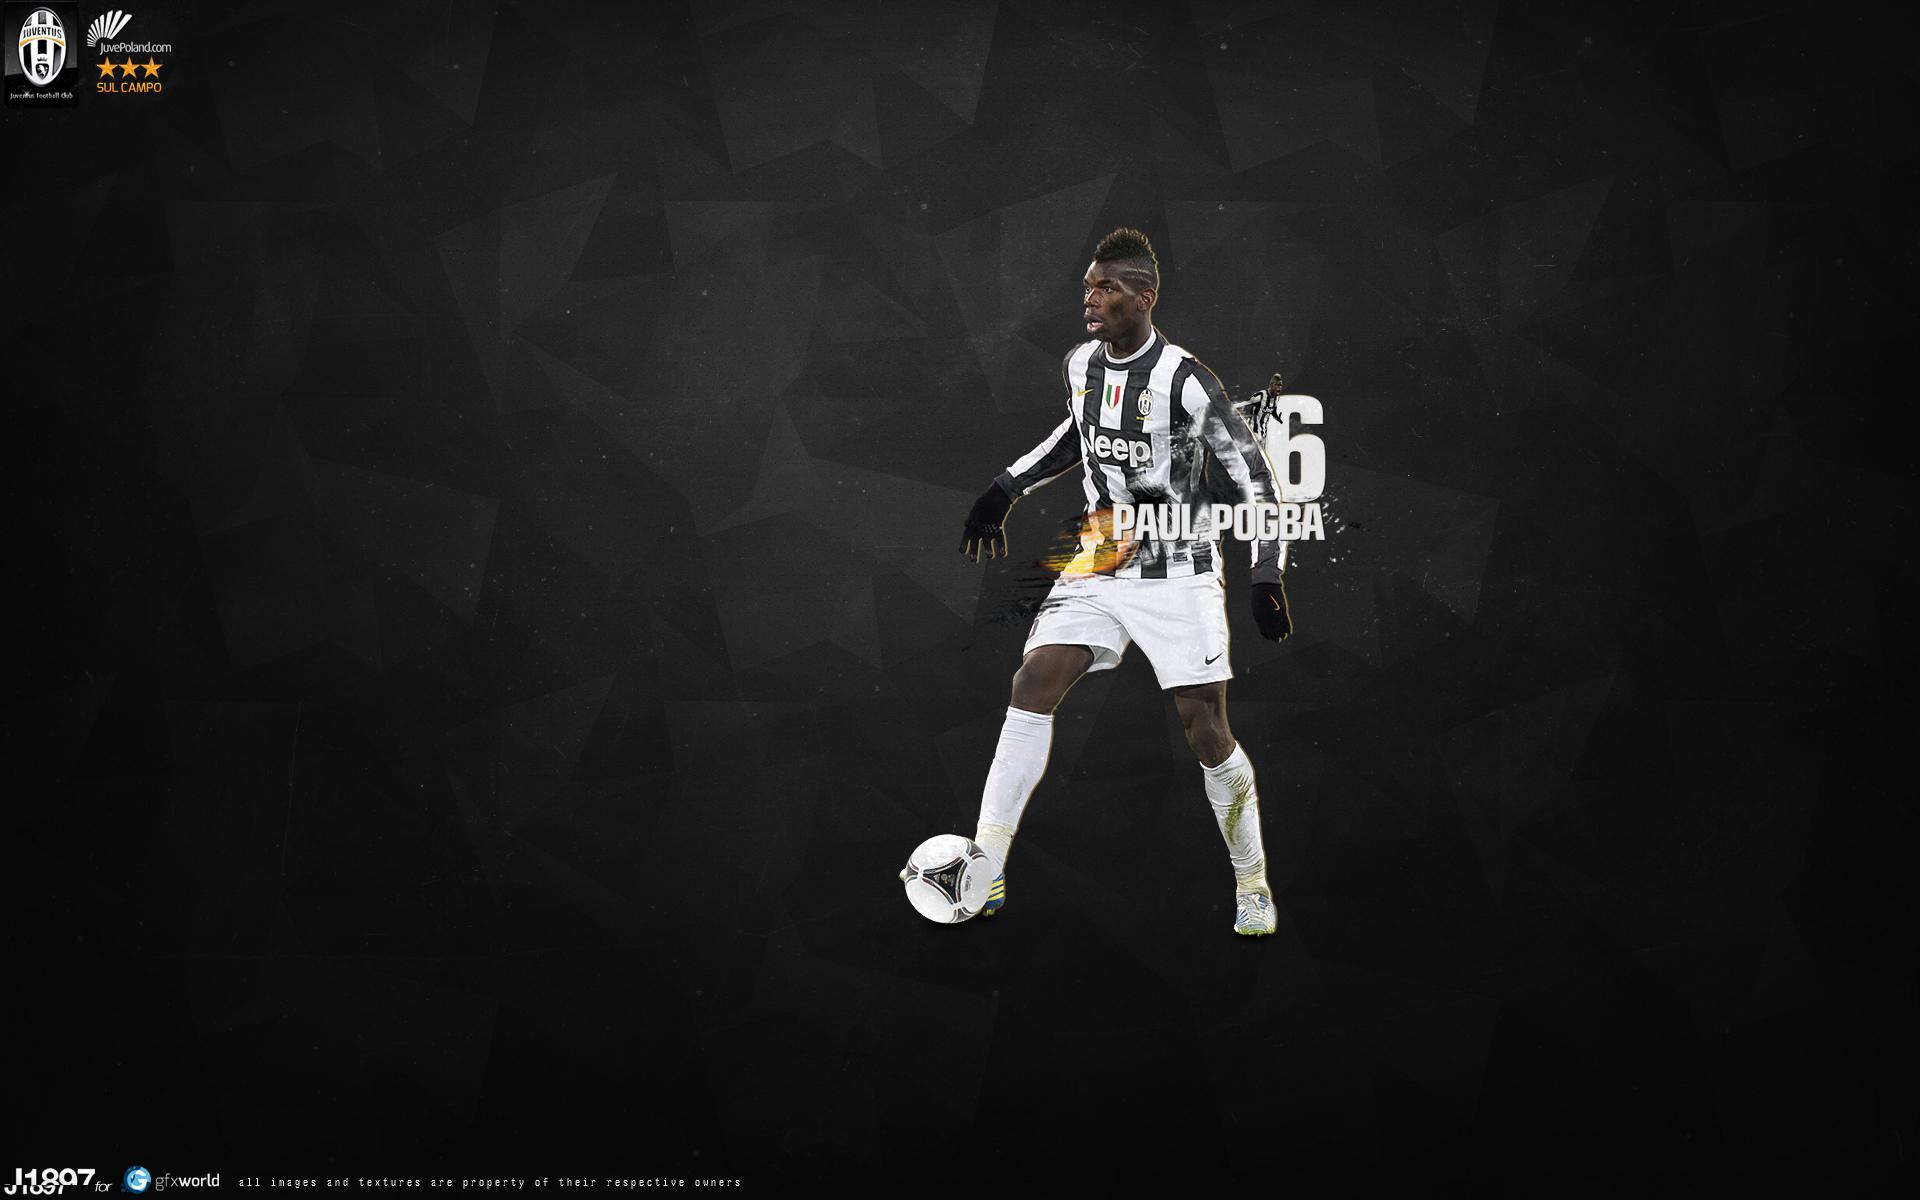 Paul Pogba Wallpaper High Resolution and Quality